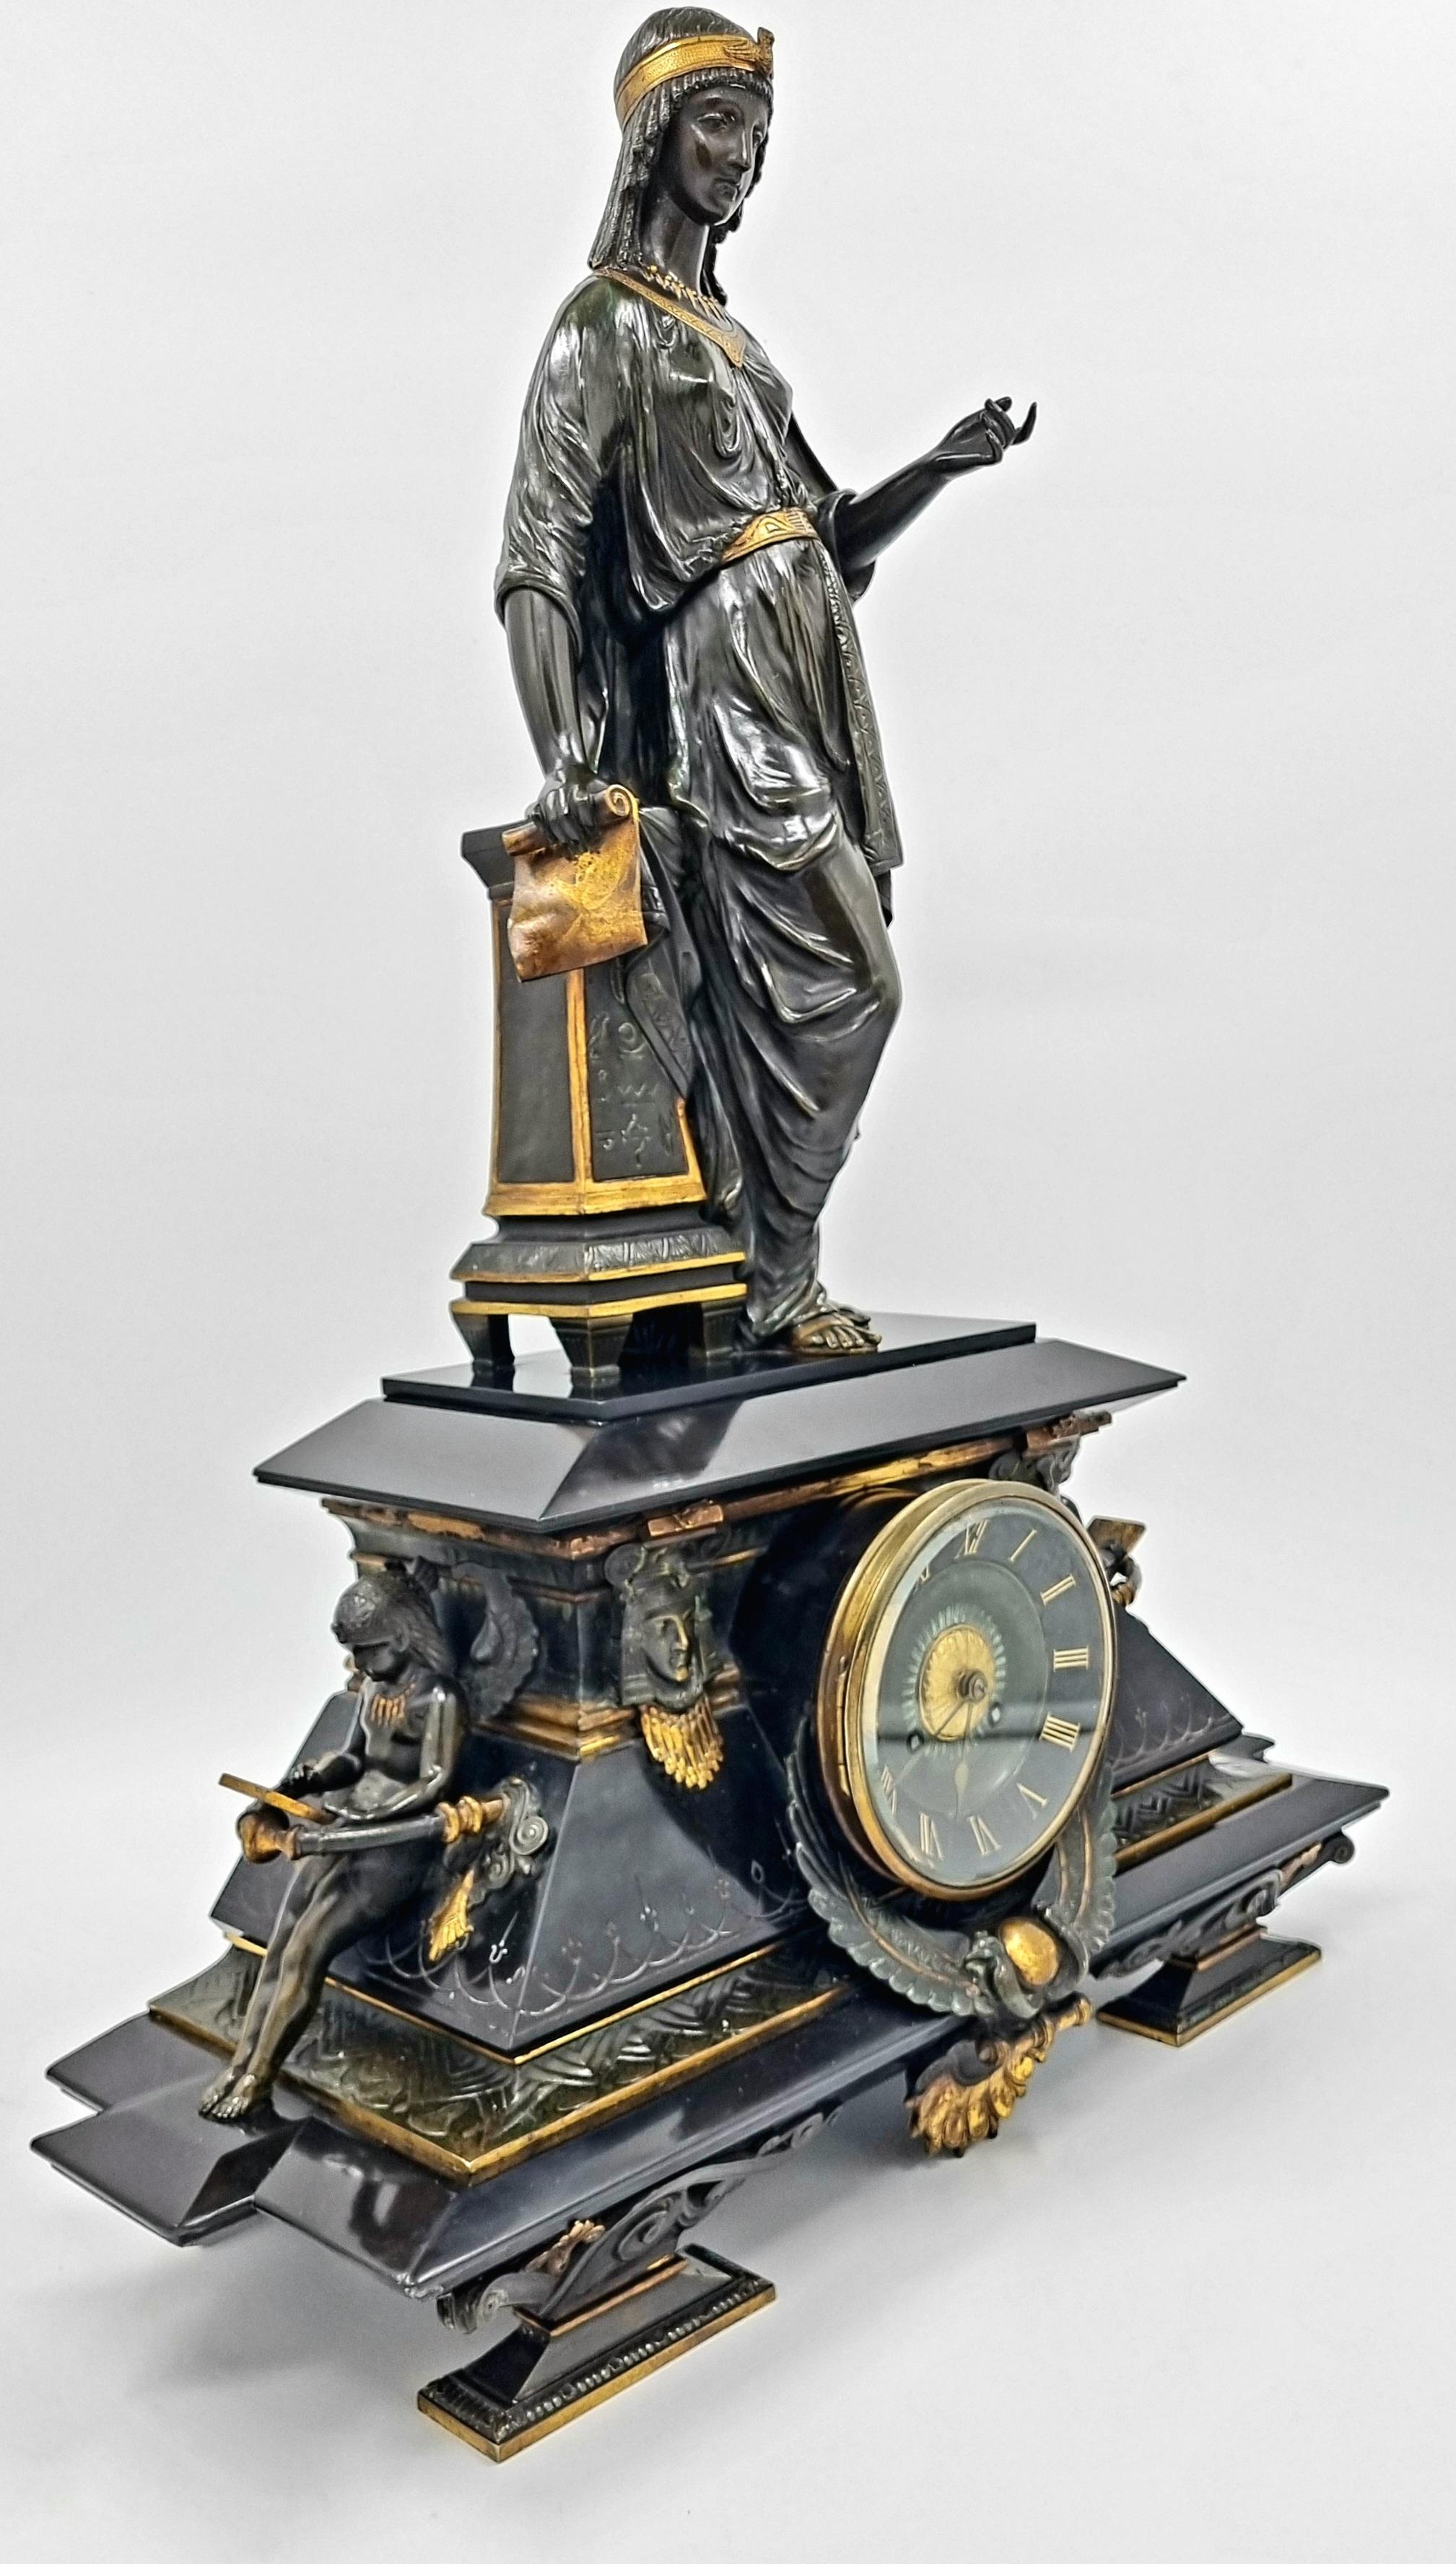 A French Egyptian Revival mantel clock, dating to the mid-19th century, is made of polished black marble and patinated bronze. The clock showcases exceptional quality and craftsmanship, using the finest materials, exuding elegance and